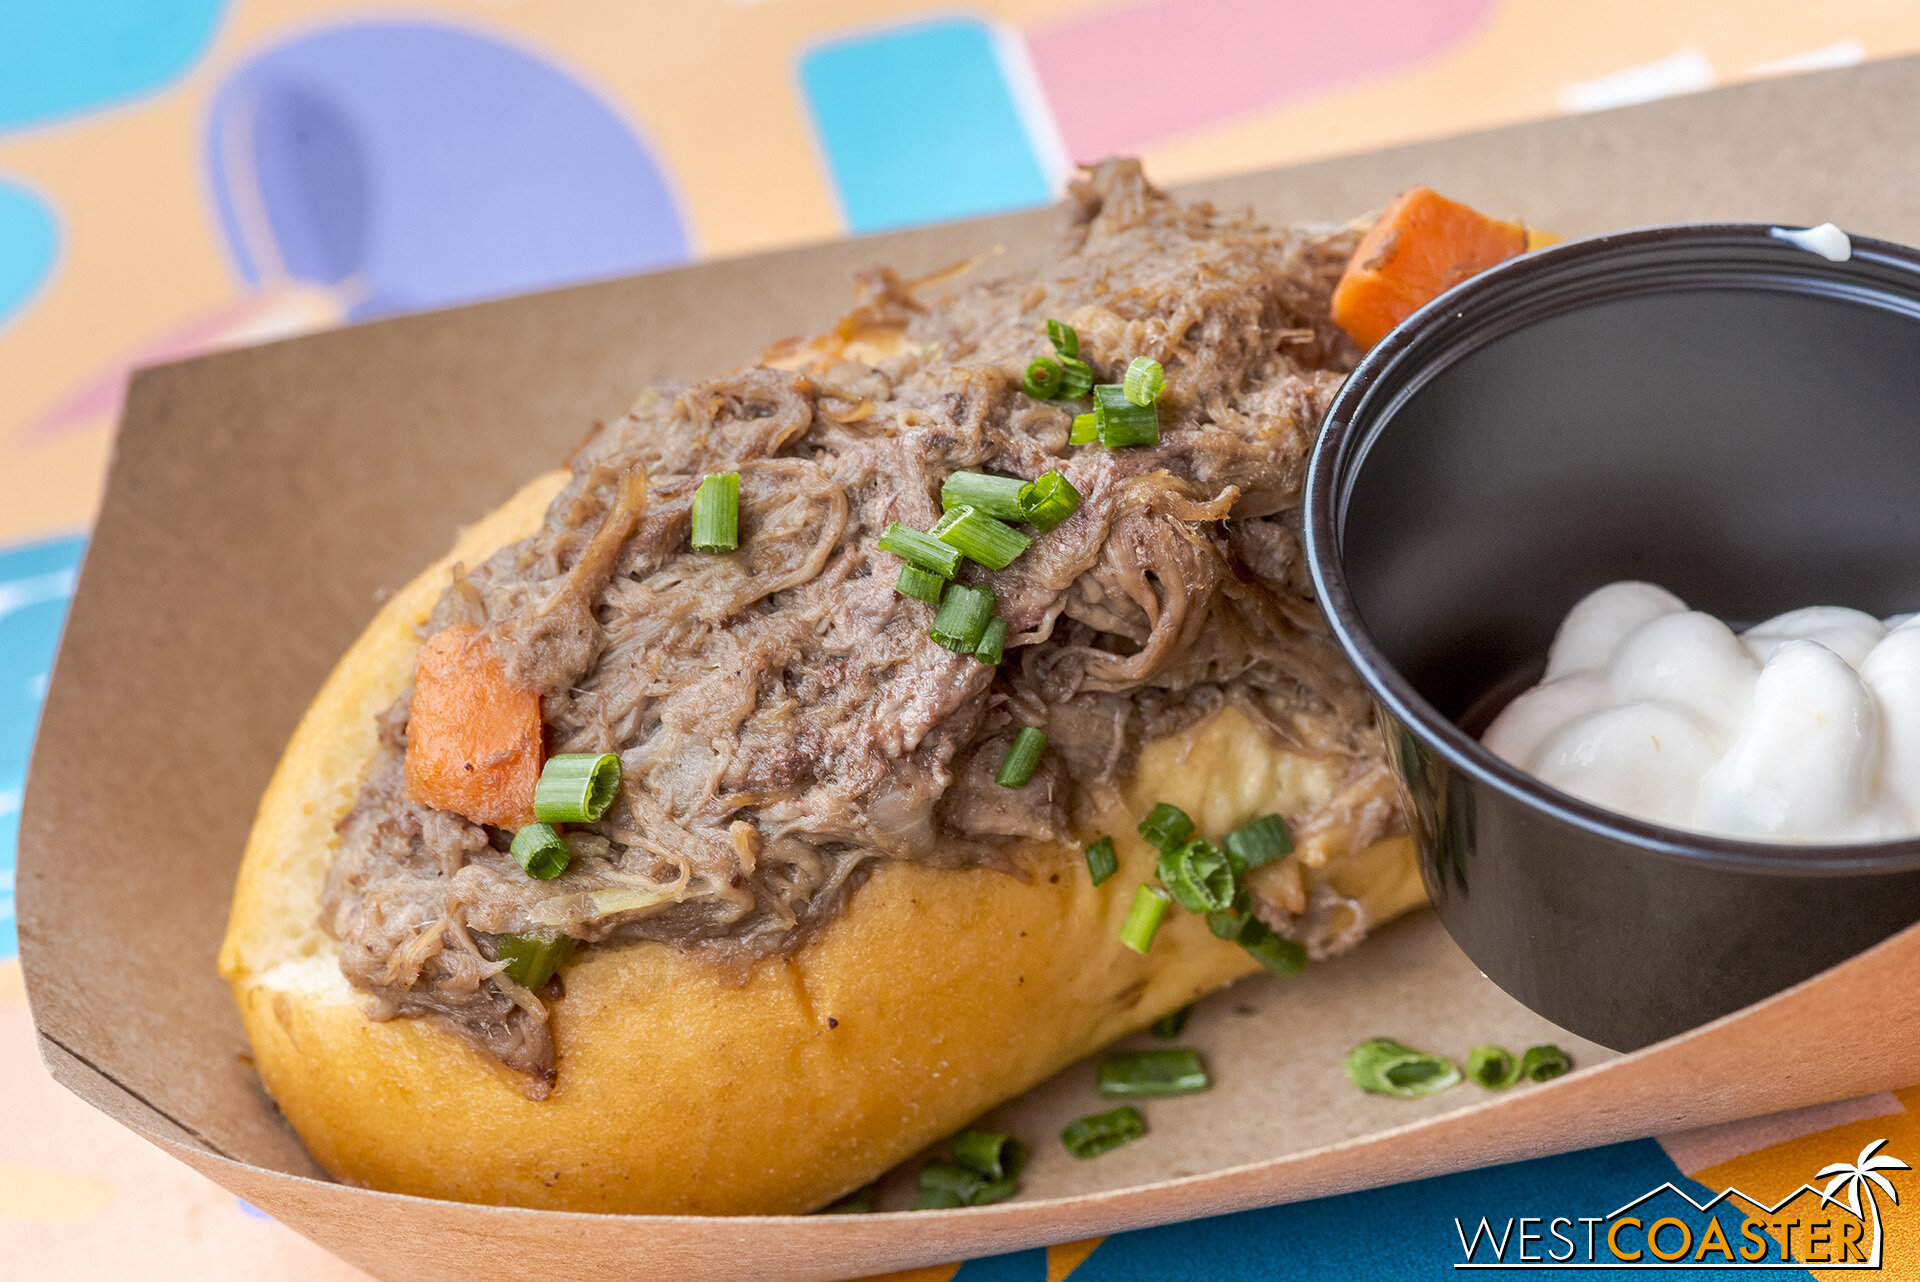  Winter Sliderland: Beef Pot Roast – Served on a potato roll with horseradish cream  This is a solid and hearty sandwich that isn’t complete without the horseradish, which adds a cool snap to the tender beef flavor.  It’s one of the more filling dish